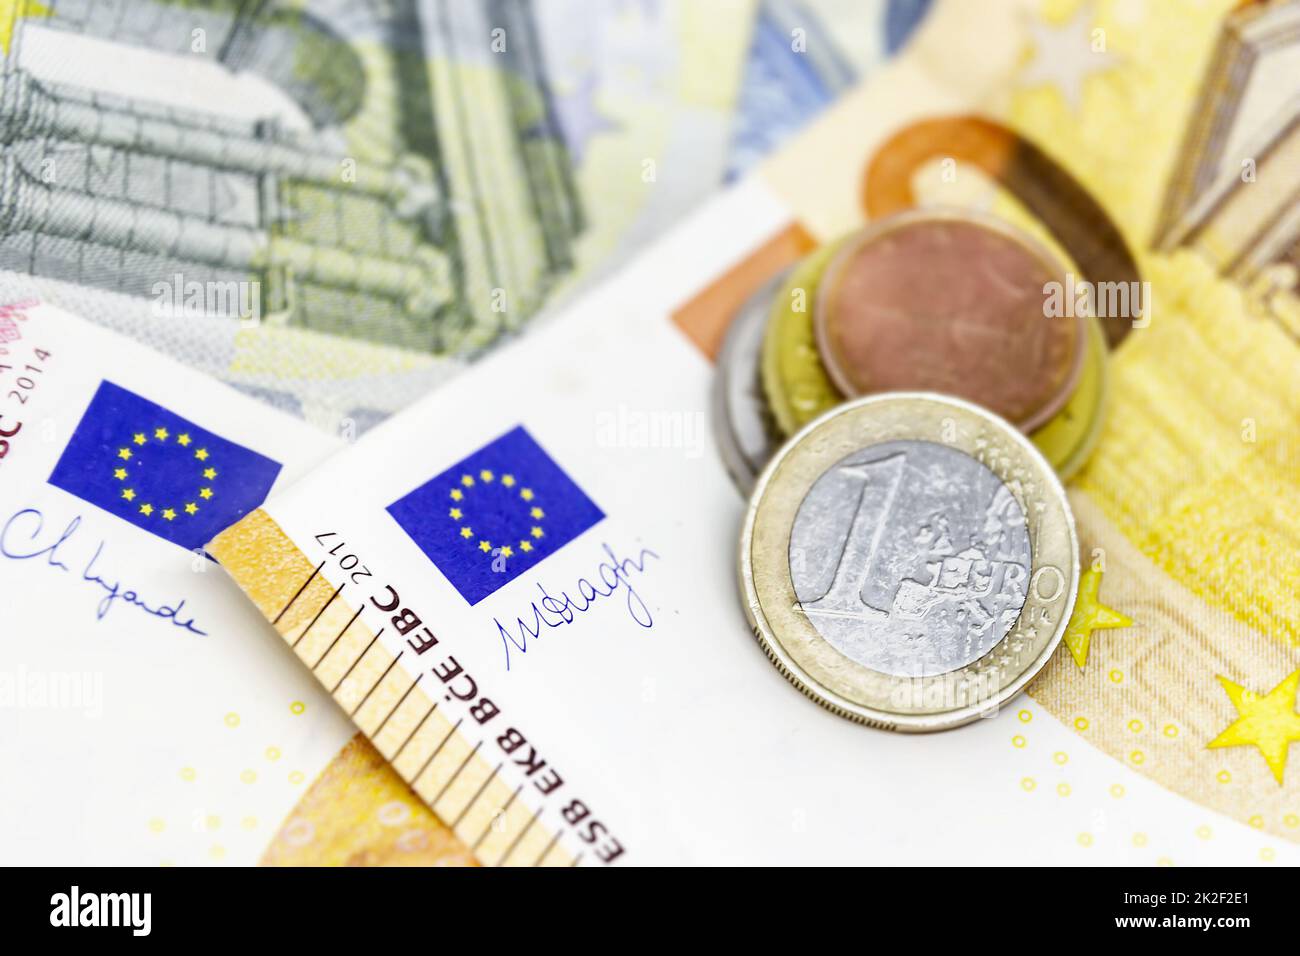 One euro coin over some banknotes of different values Stock Photo